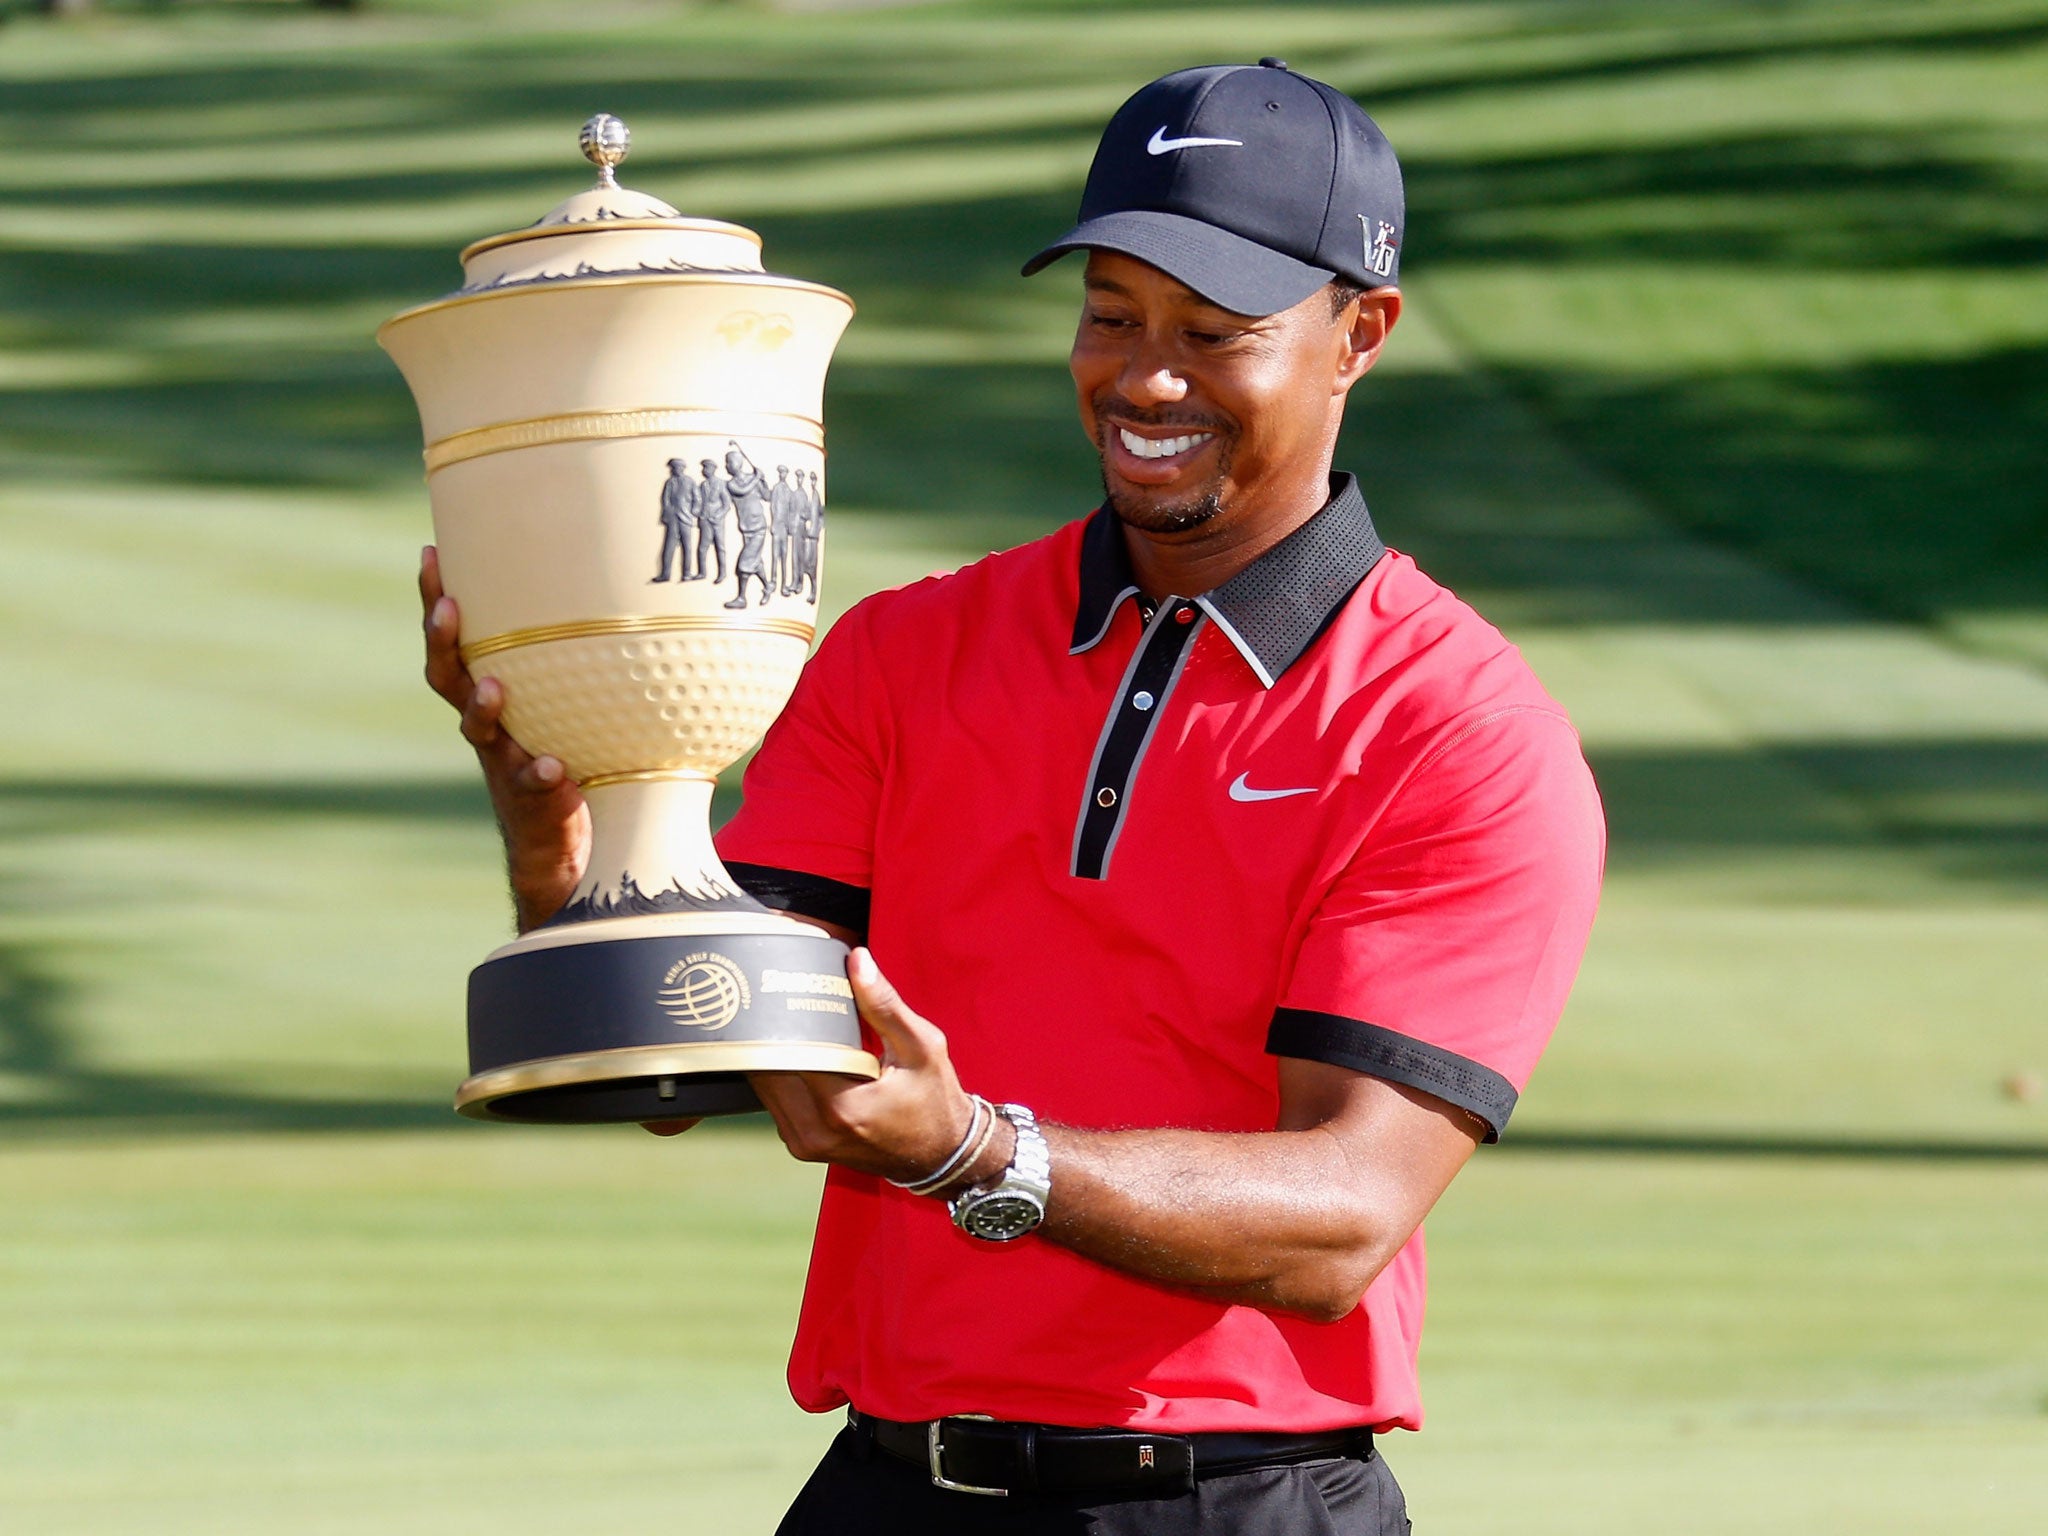 Tiger Woods shows off the trophy after his eighth Invitational win